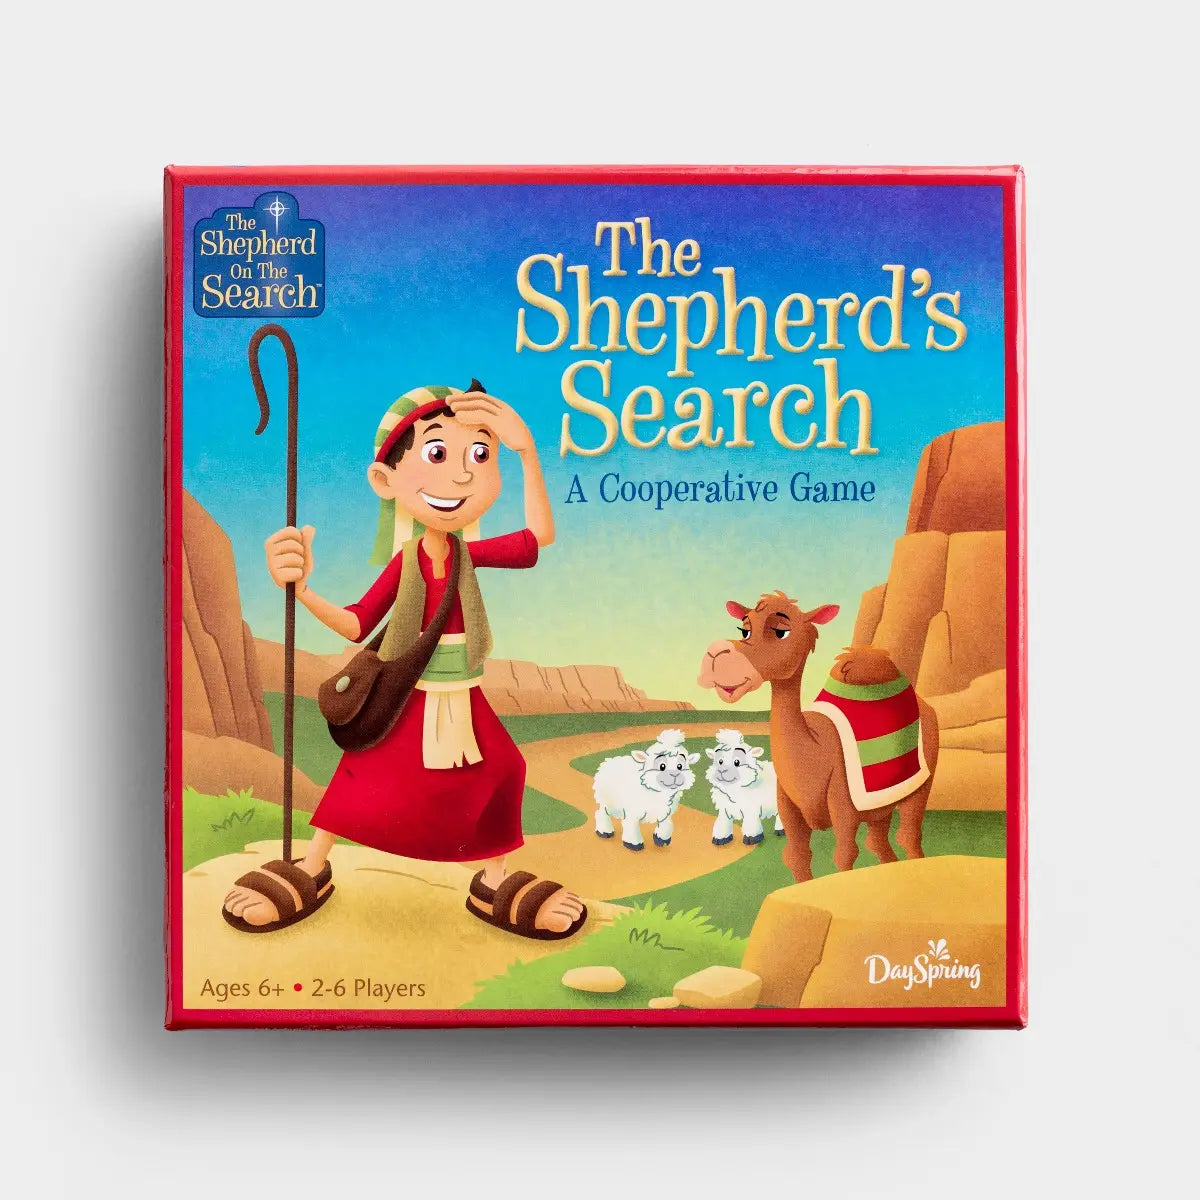 The Shepherd's Search - A Cooperative Game